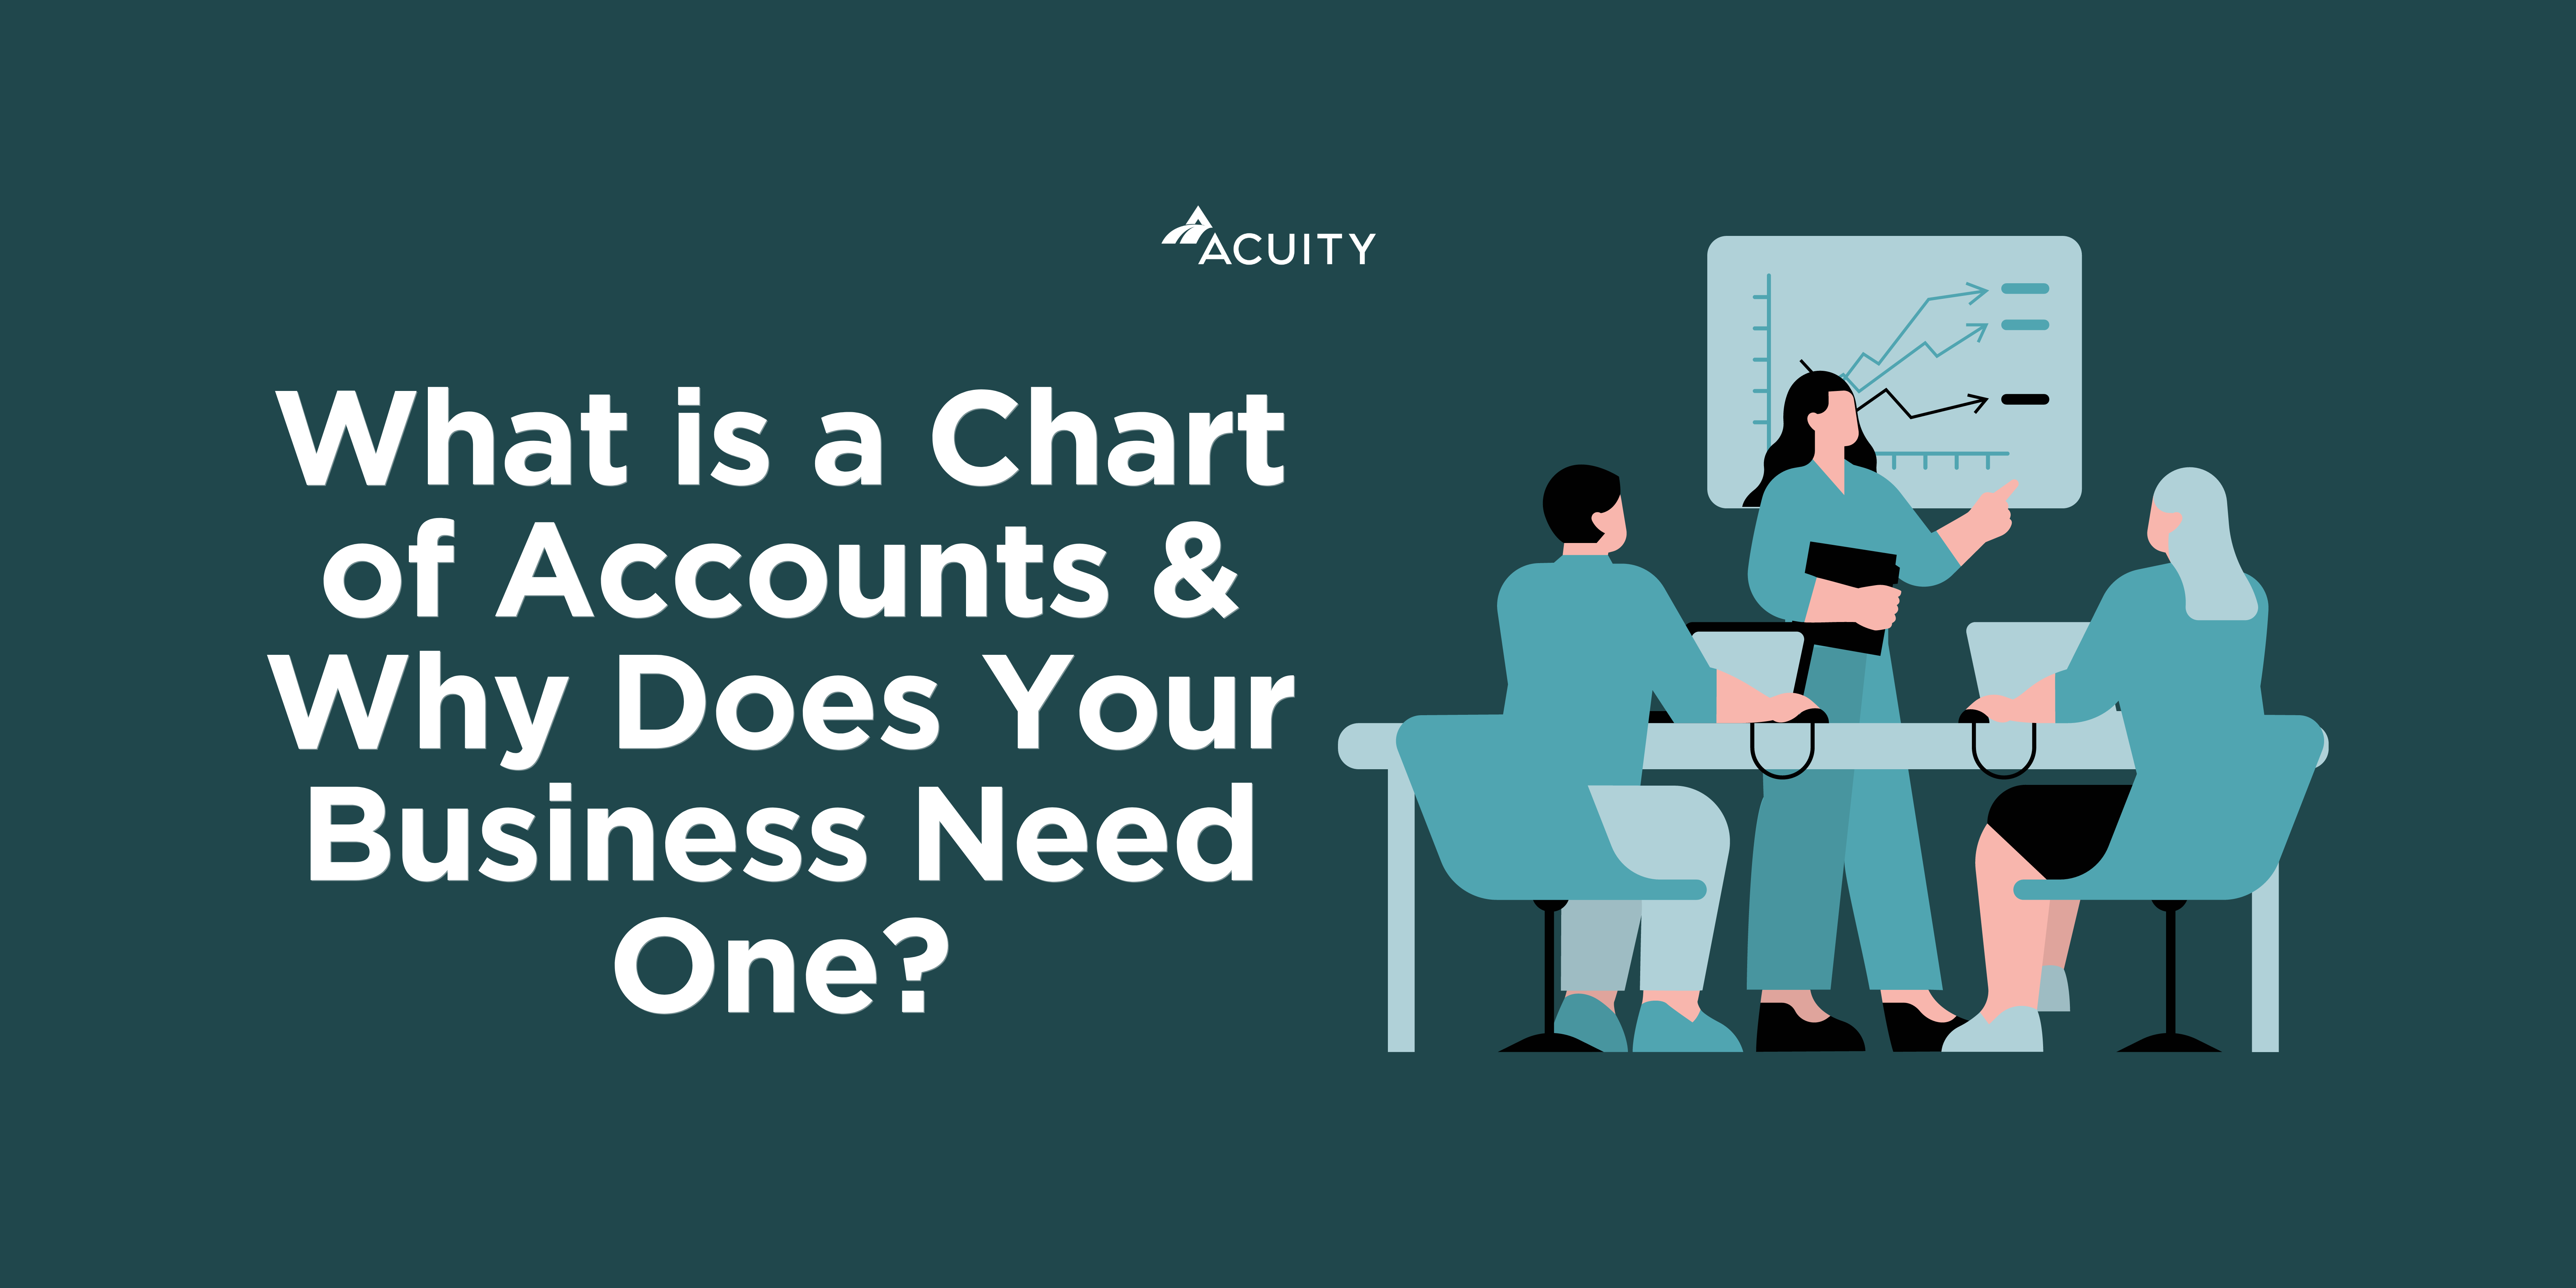 What is a Chart of Accounts & Why Does Your Business Need One? | Acuity